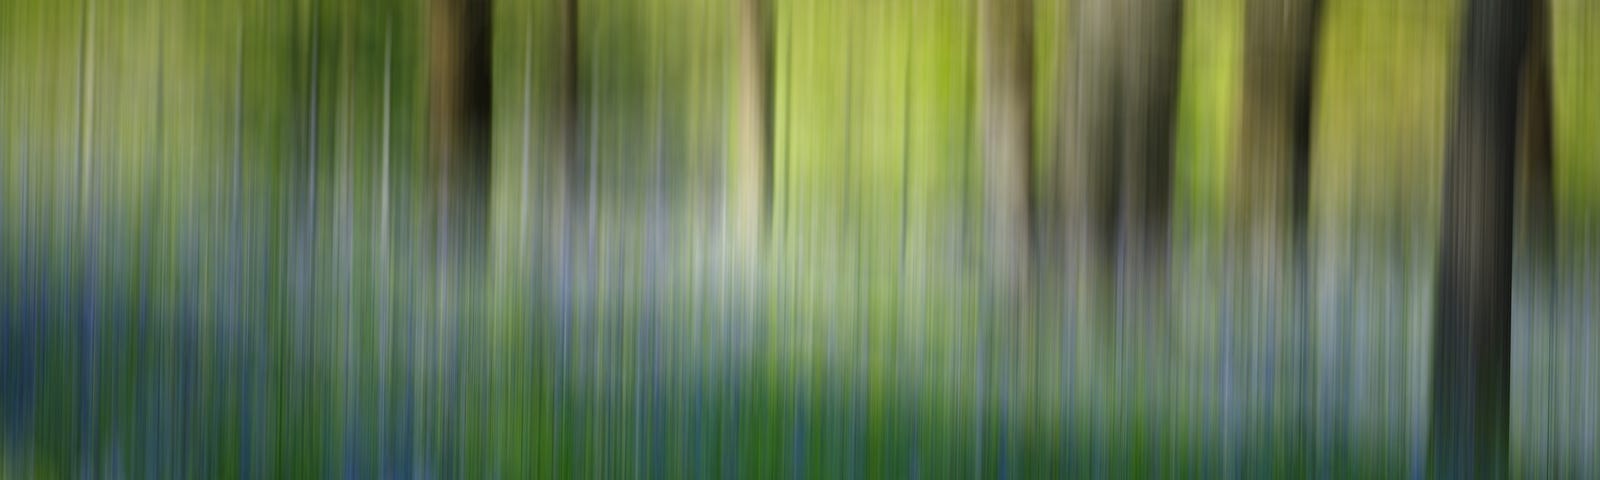 Camera movement photo of bluebells in a wood